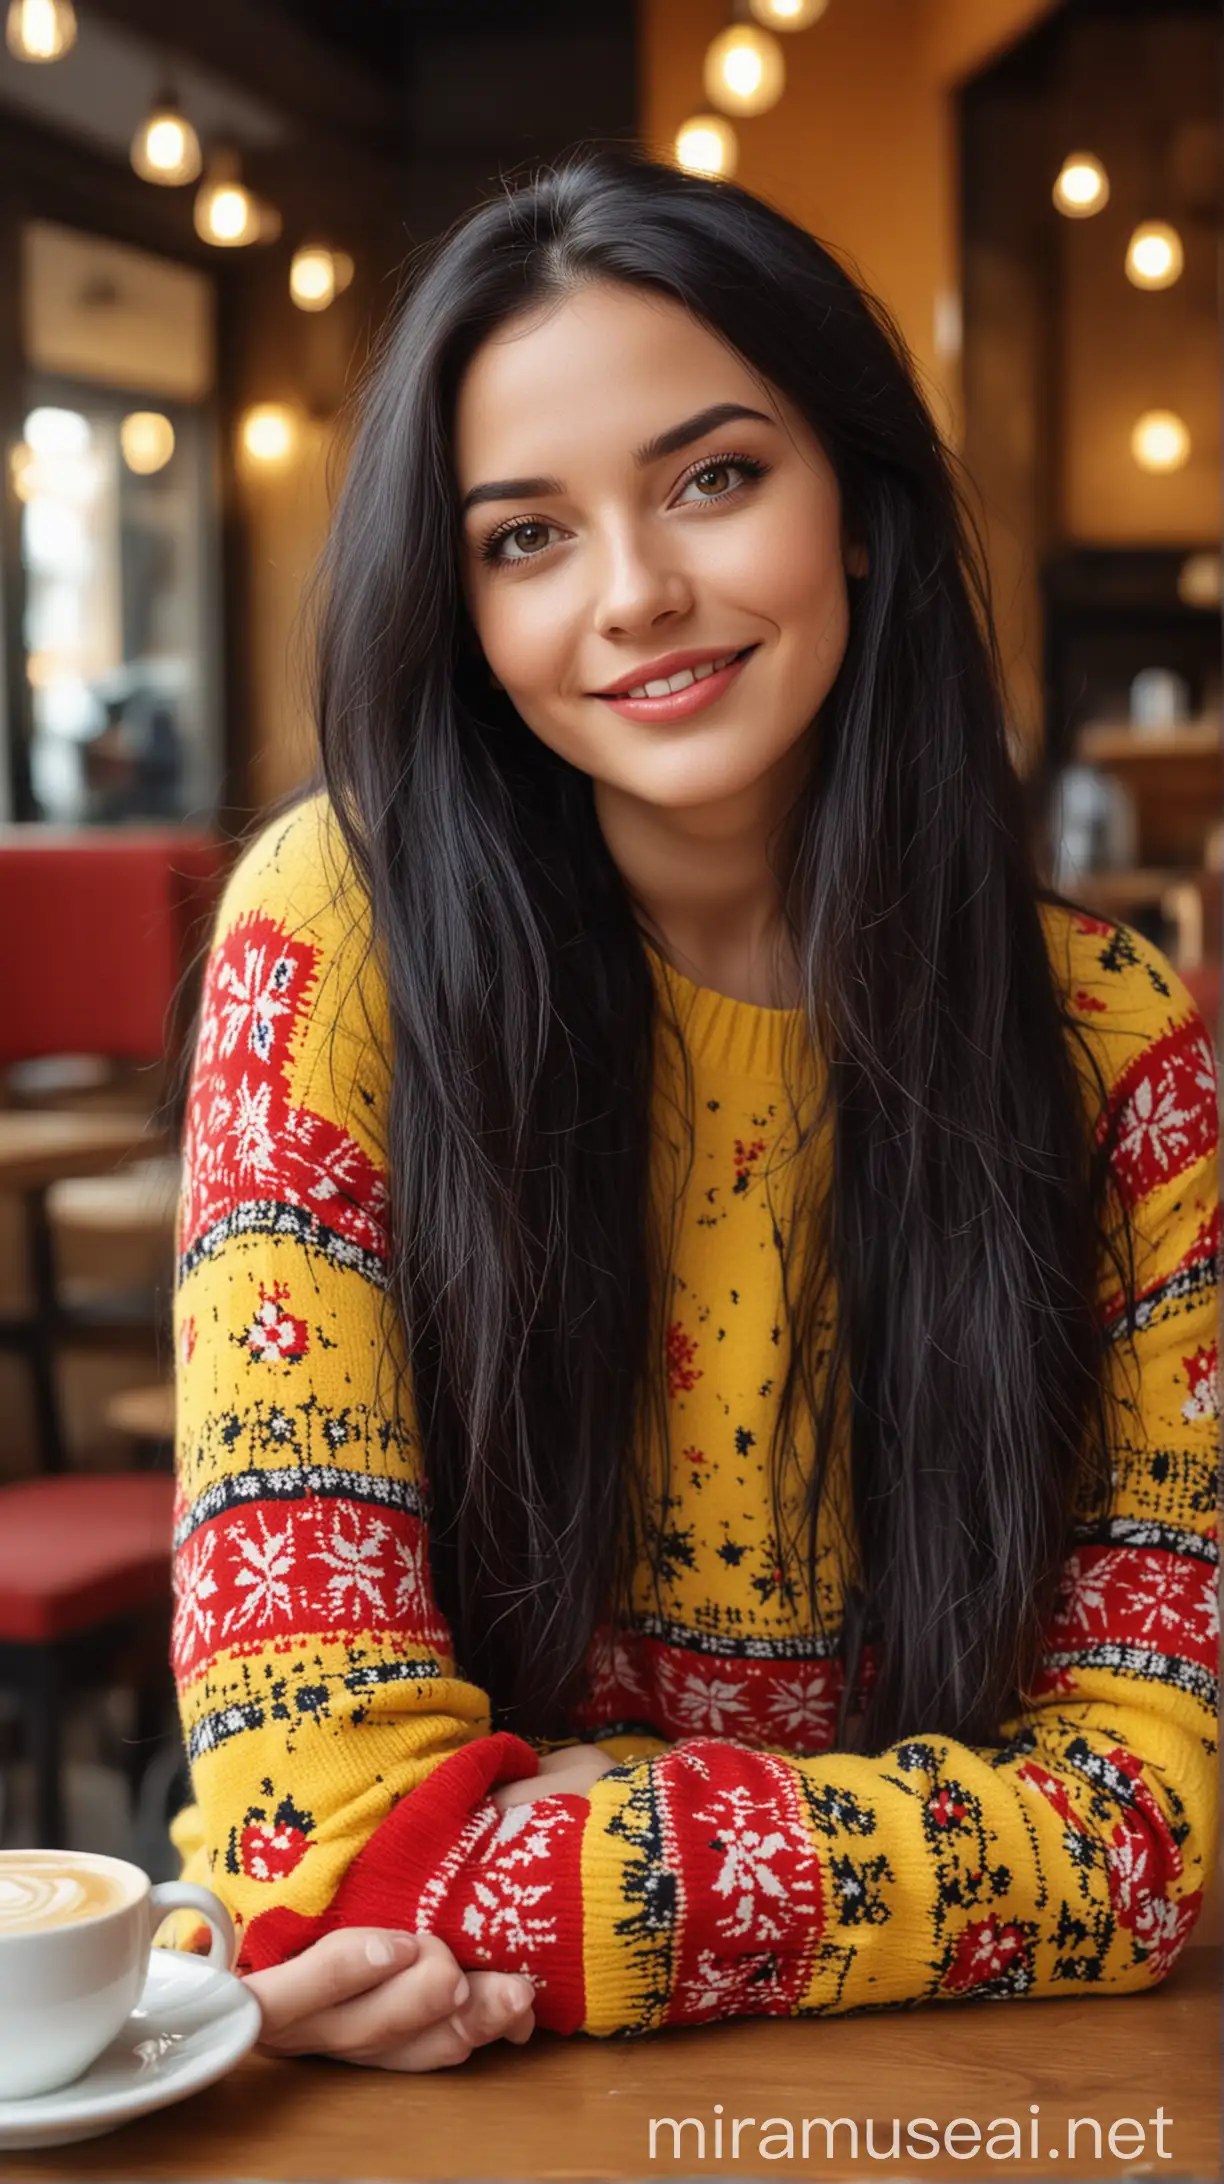 photo of a very beautiful woman, long black hair, wearing a blaster yellow red patterned sweater, looking in front of the camera, hand stroking her hair, sitting relaxed in a cafe, bright atmosphere, cheerful, smiling, photo taken by S24 ultra camera, UHD quality